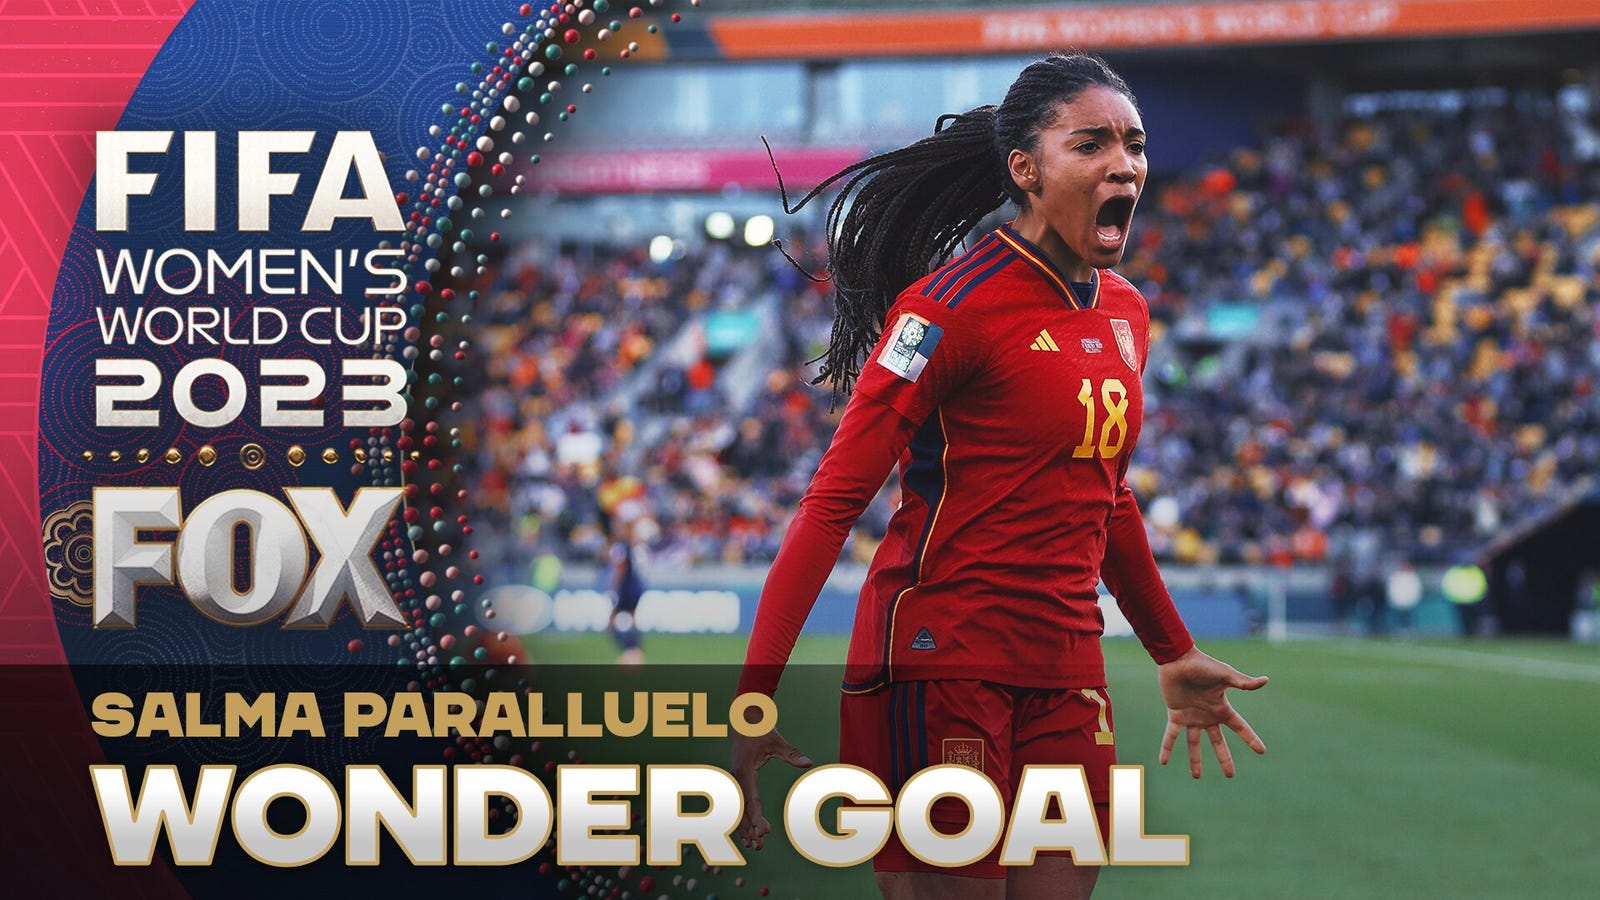 'The shot will stay with me forever' - Salma Paralluelo on her clutch goal against the Netherlands and making history with Spain